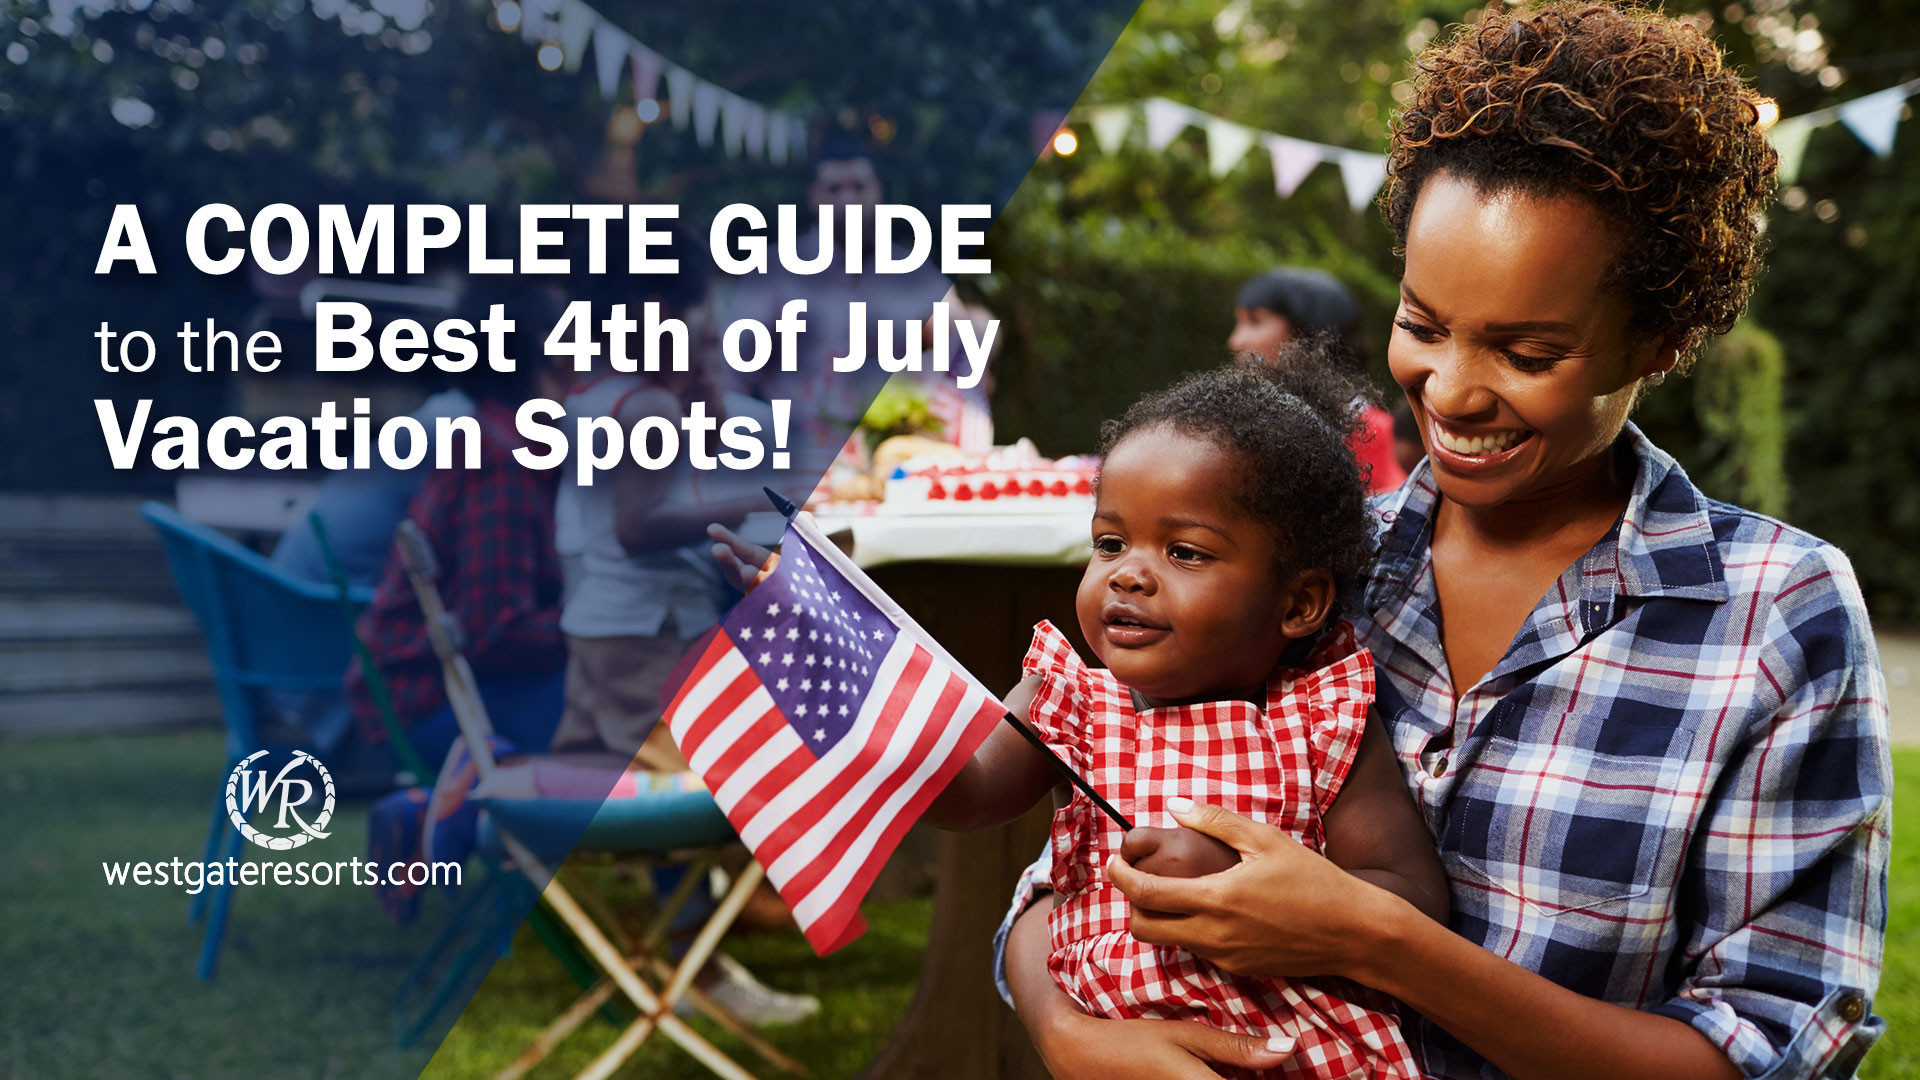 Best 4th of July Vacation Spots | 4th of July Vacation Ideas | Westgate Resorts